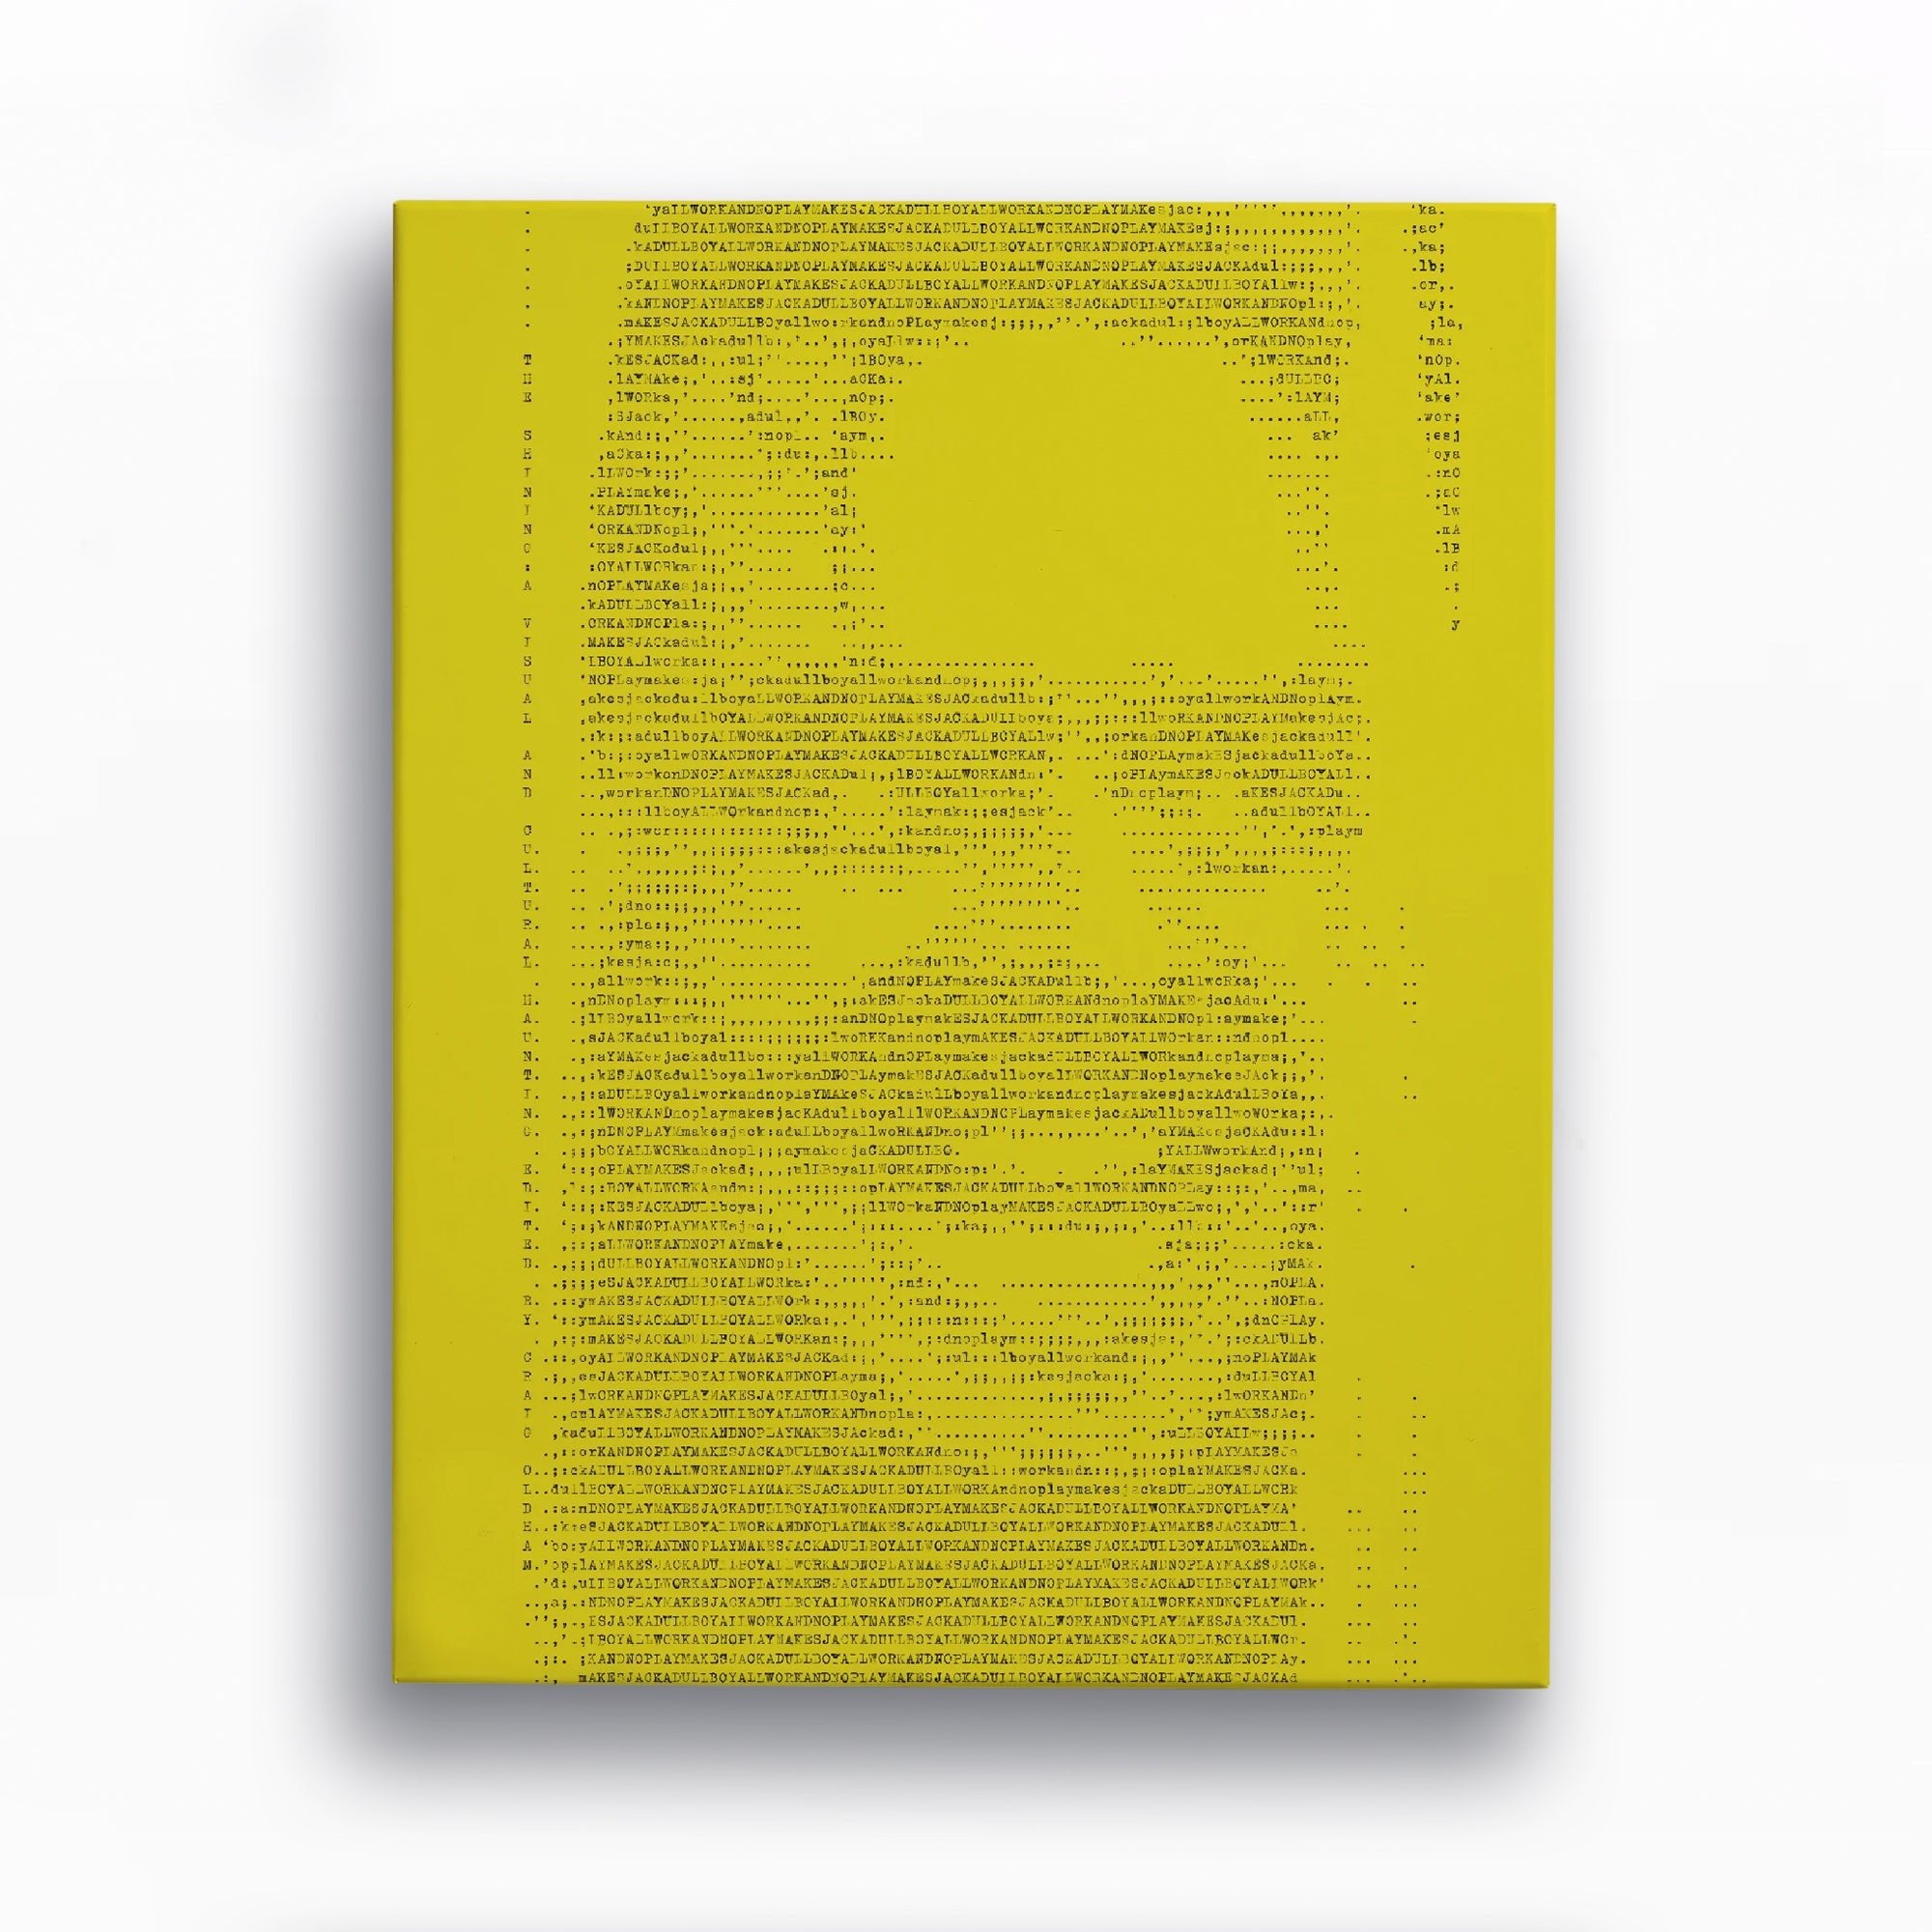 The Shining: A Visual and Cultural Haunting (Standard Edition)